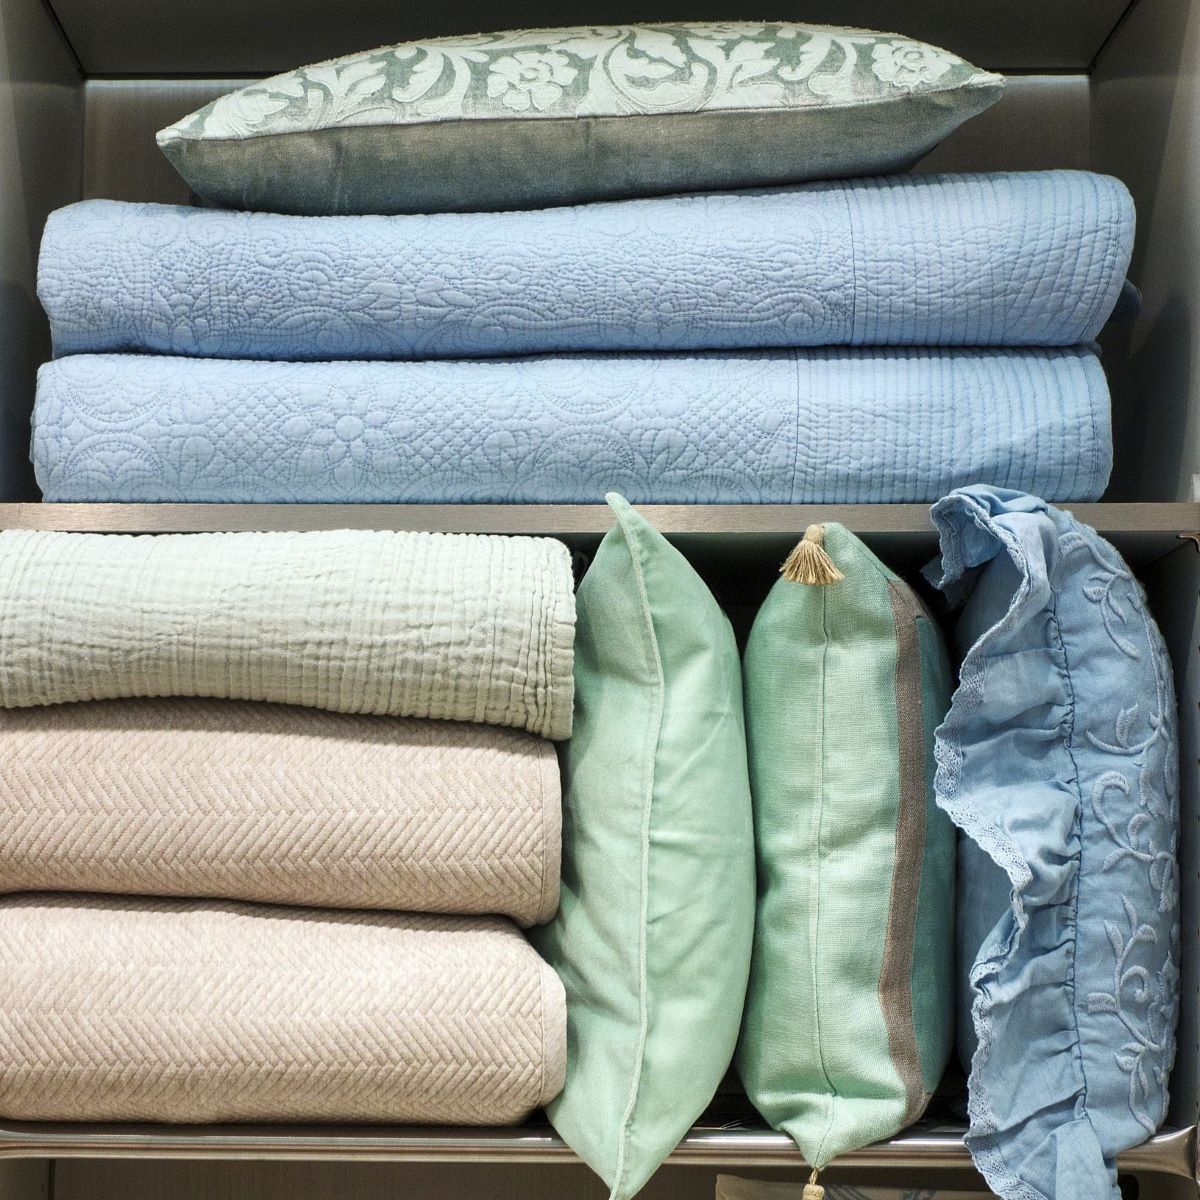 How To Store Linens In Closet